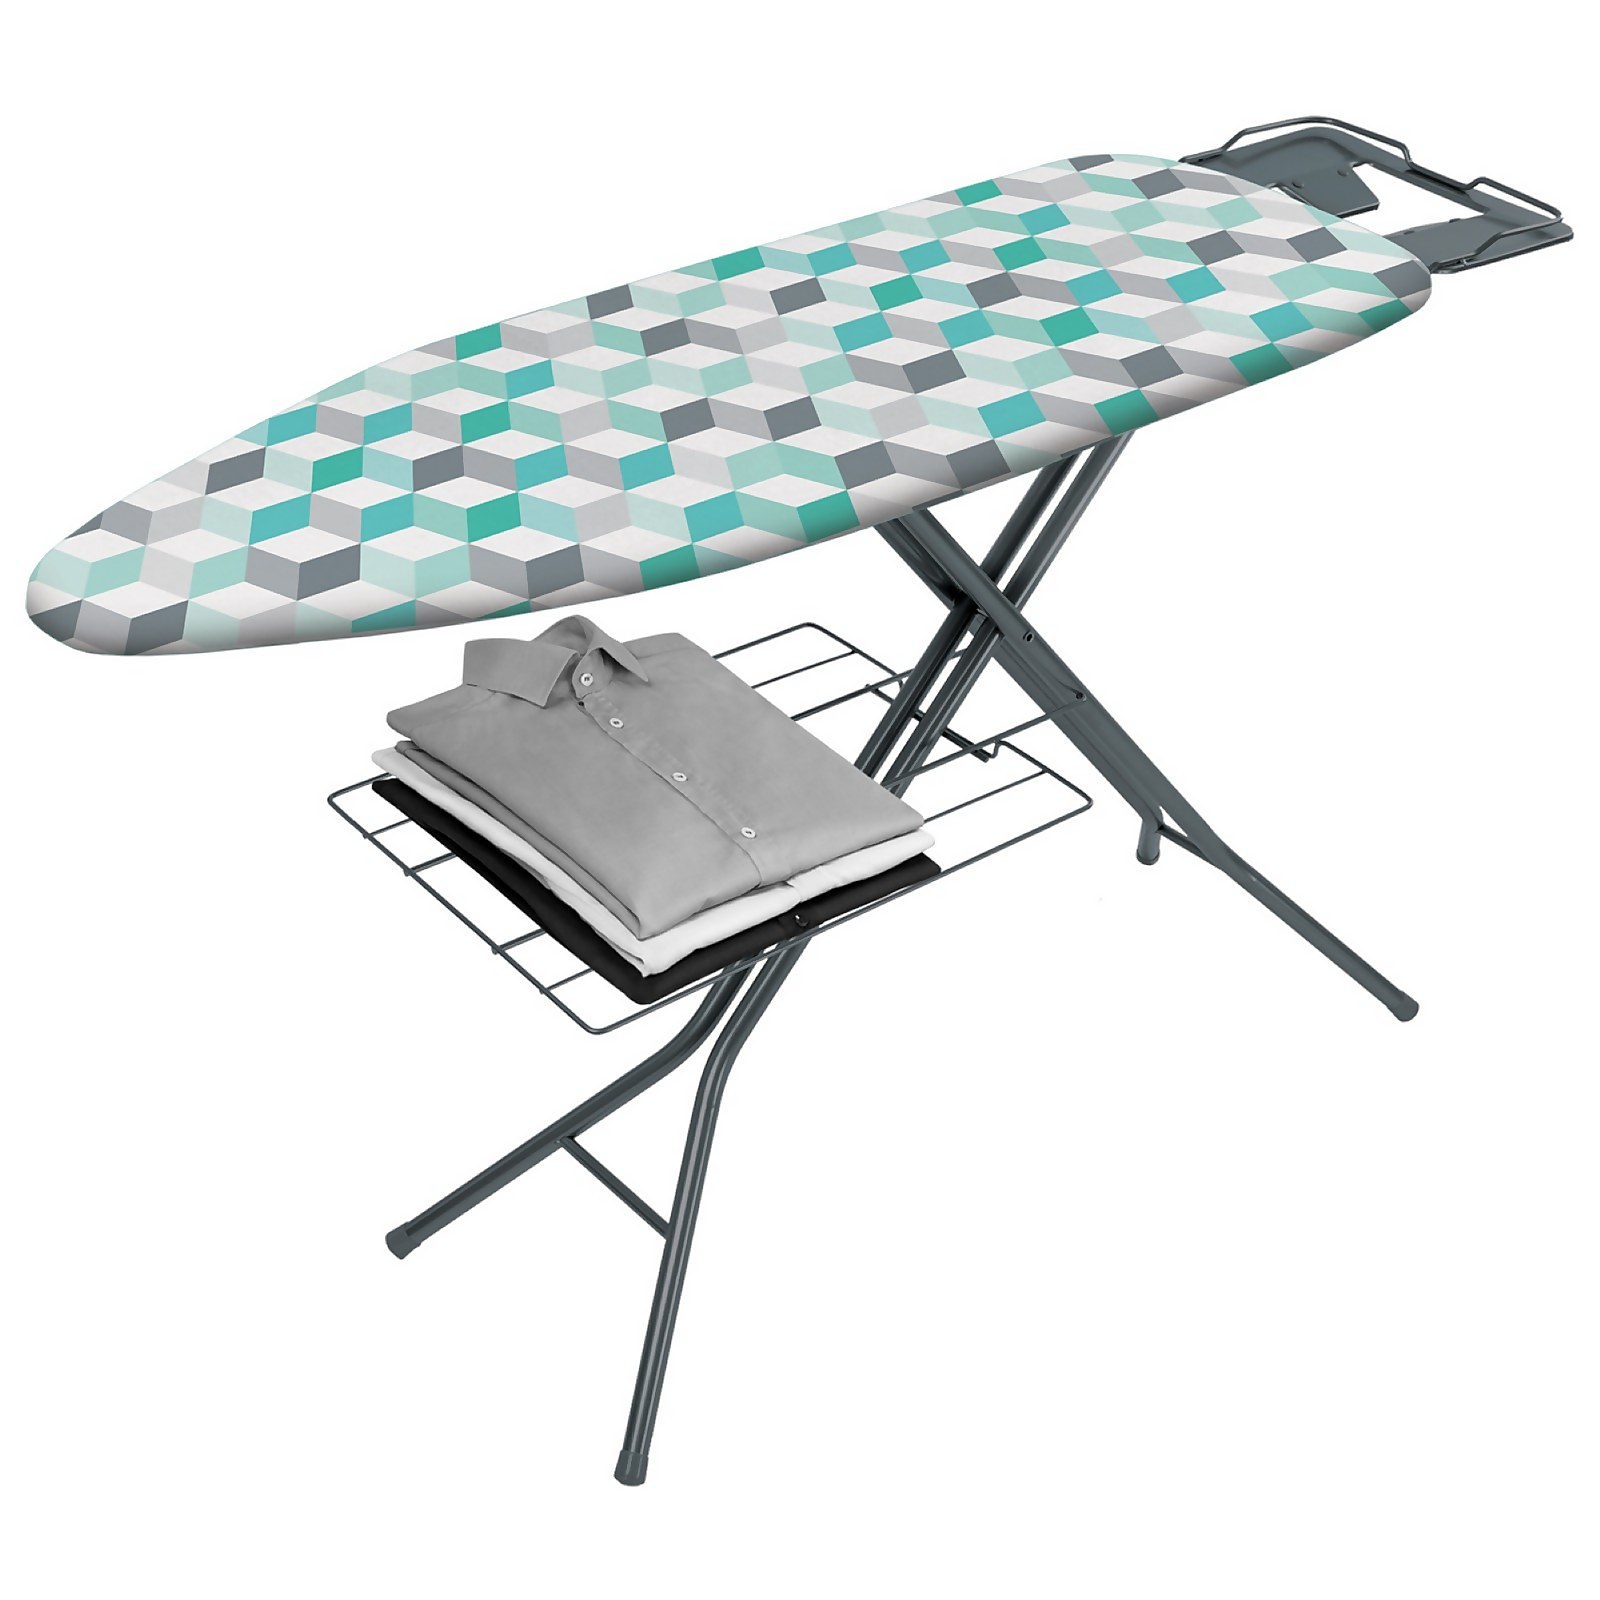 Antares Ironing Board - Cubes Design Cover